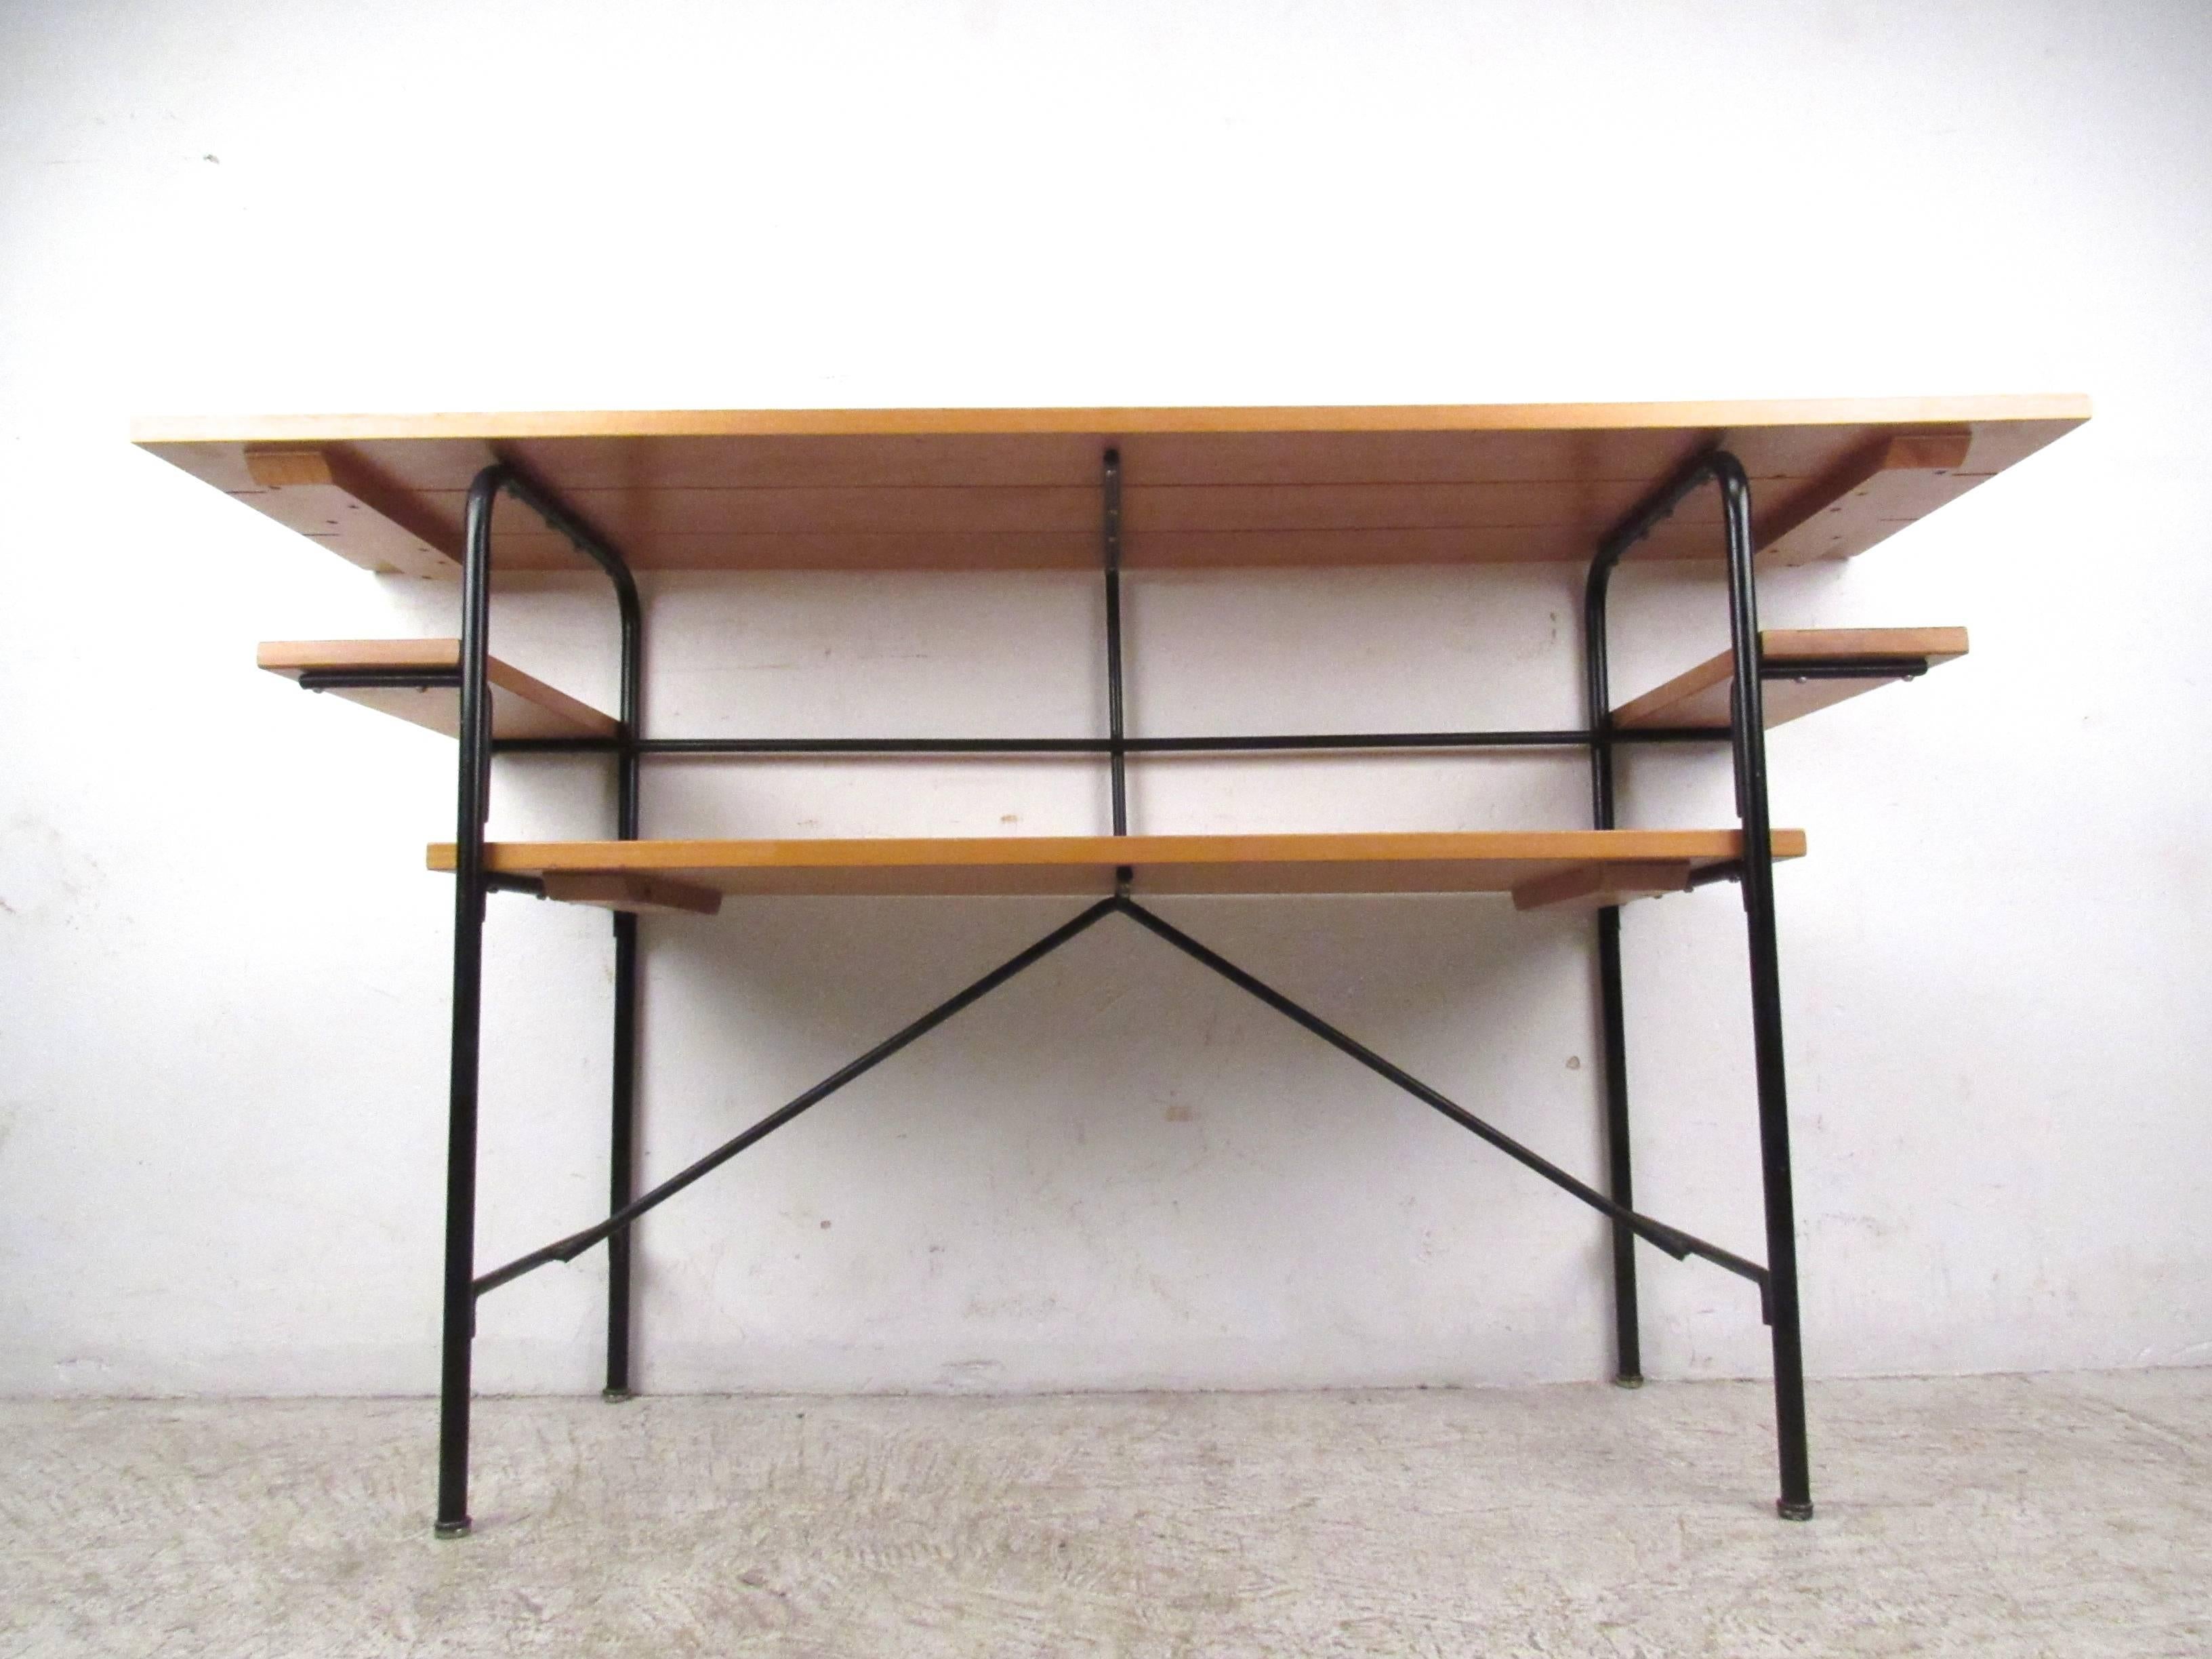 This unique multi-tier metal and slat desk offers a simplistic Mid-Century style design for any interior. Shelves for storage or workspace, this is a unique table option for computer use or storage. Please confirm item location (NY or NJ).